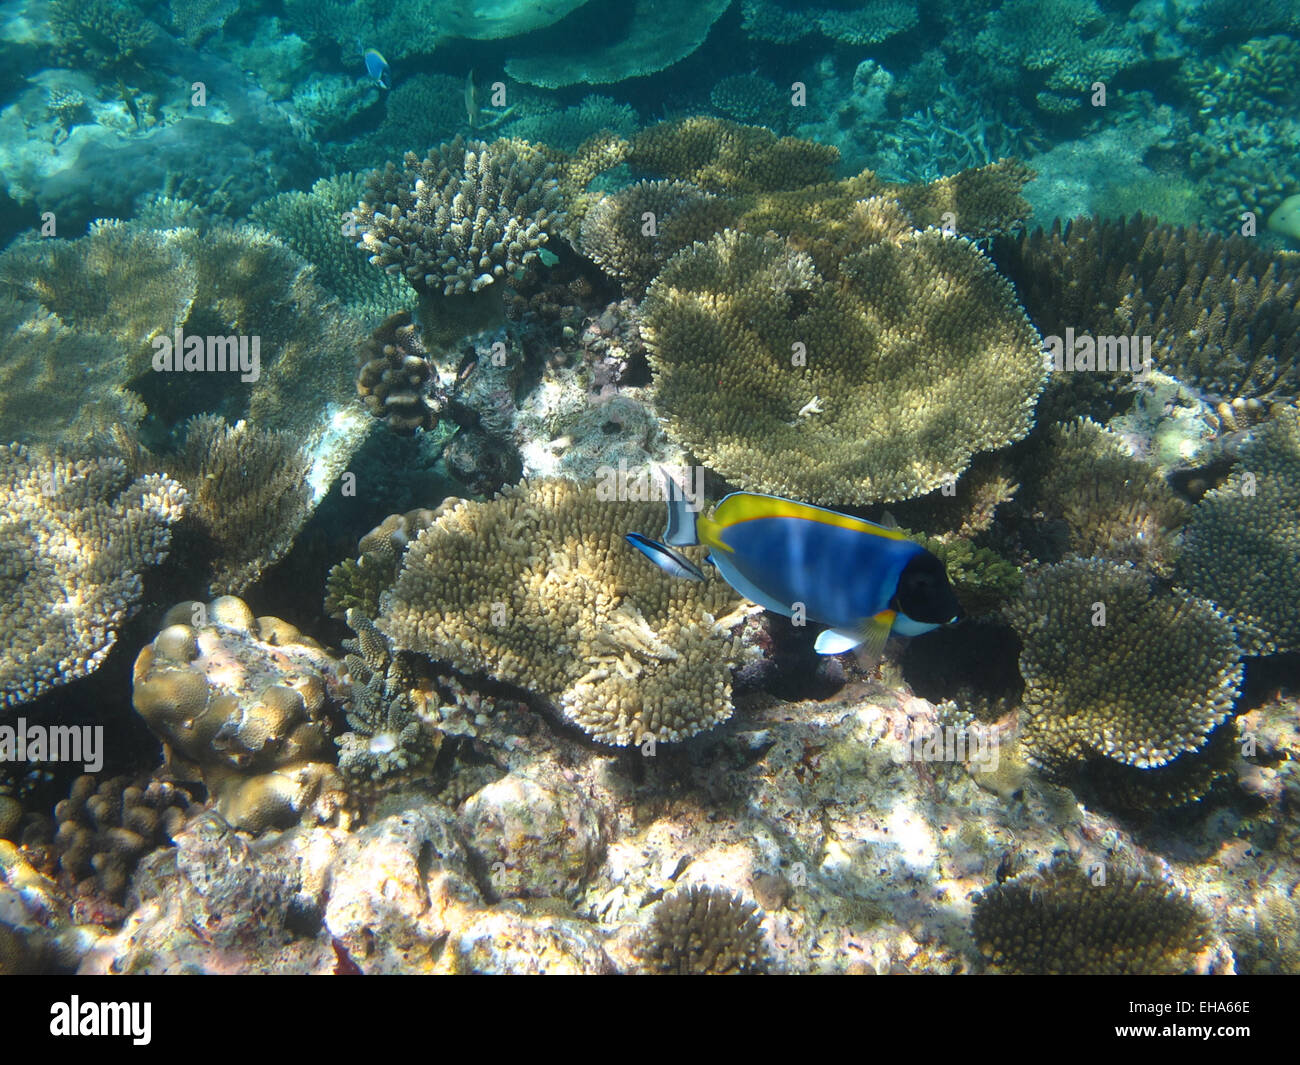 Powder-blue Surgeonfish and Blue-striped Sabretooth Blenny on a coral reef in the Maldives Stock Photo